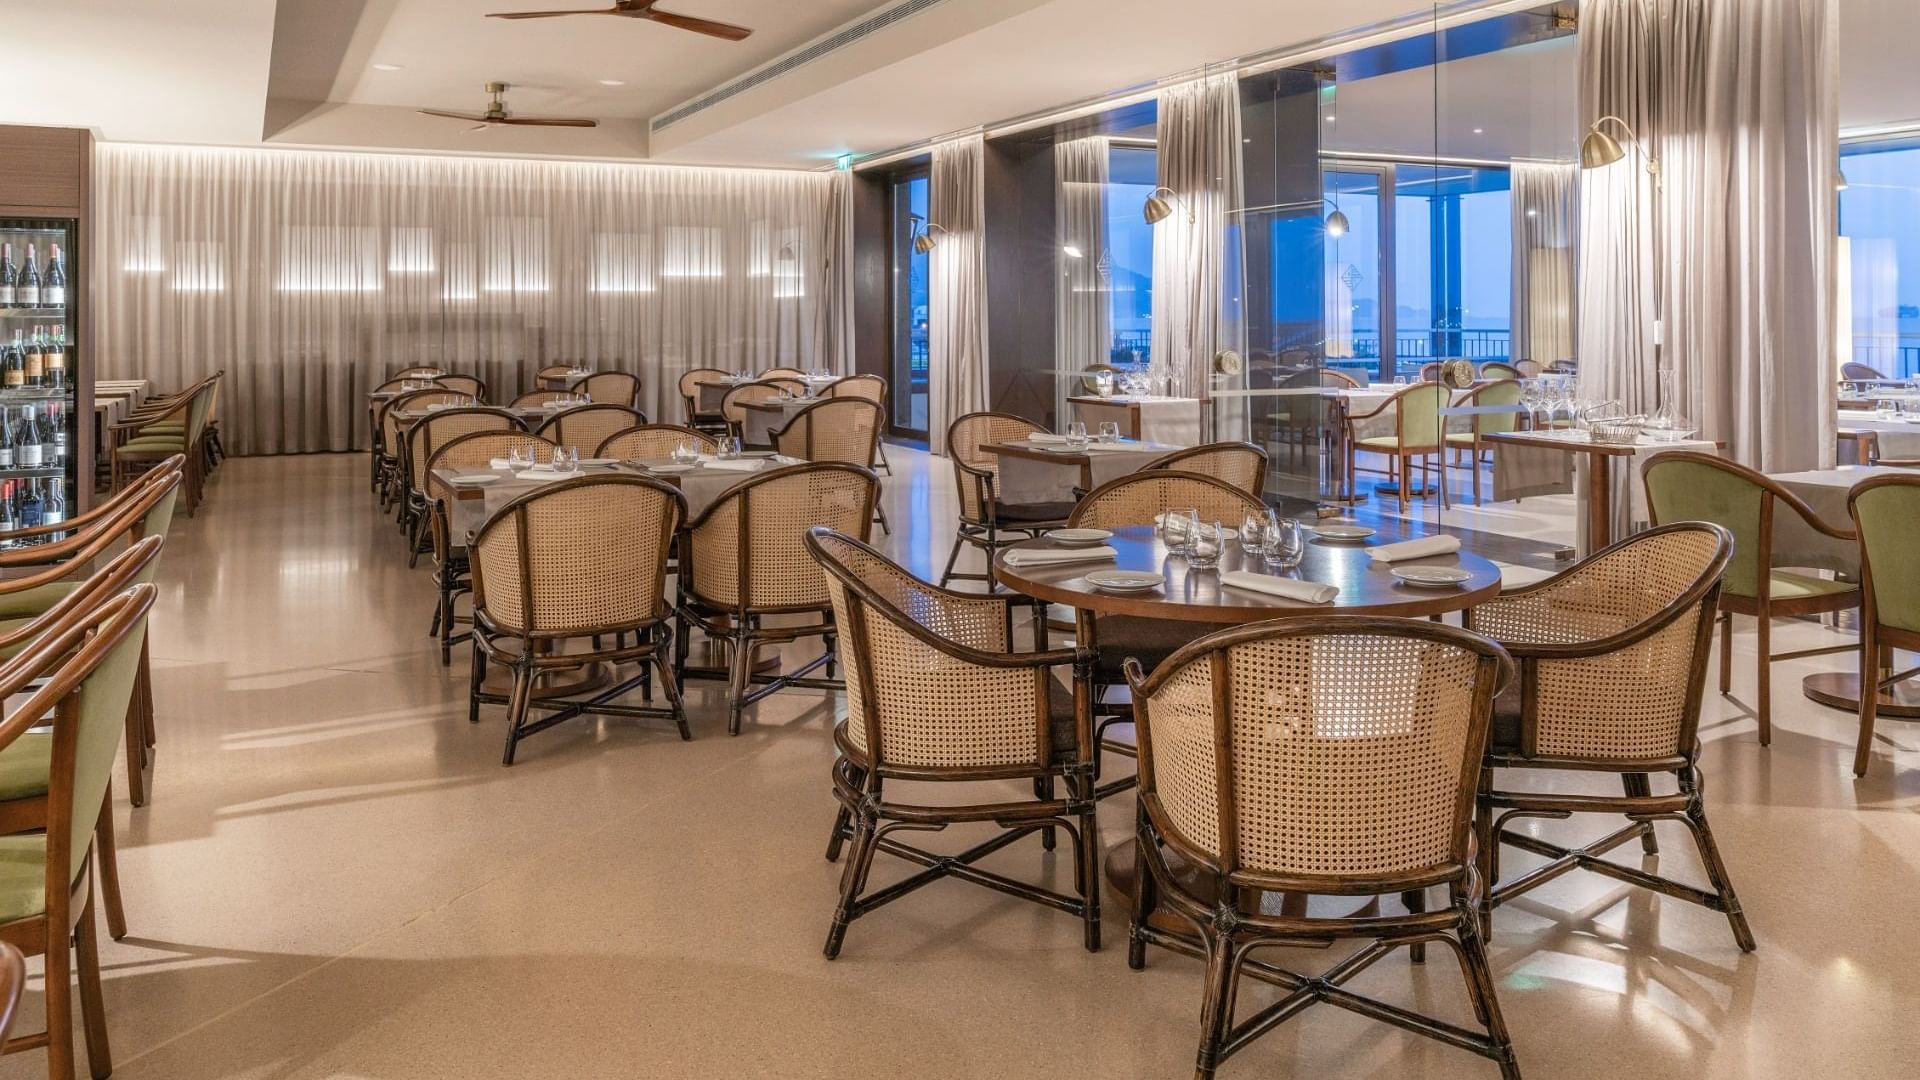 Dining hall of Balcony Restaurant at Bensaude Hotels Collection